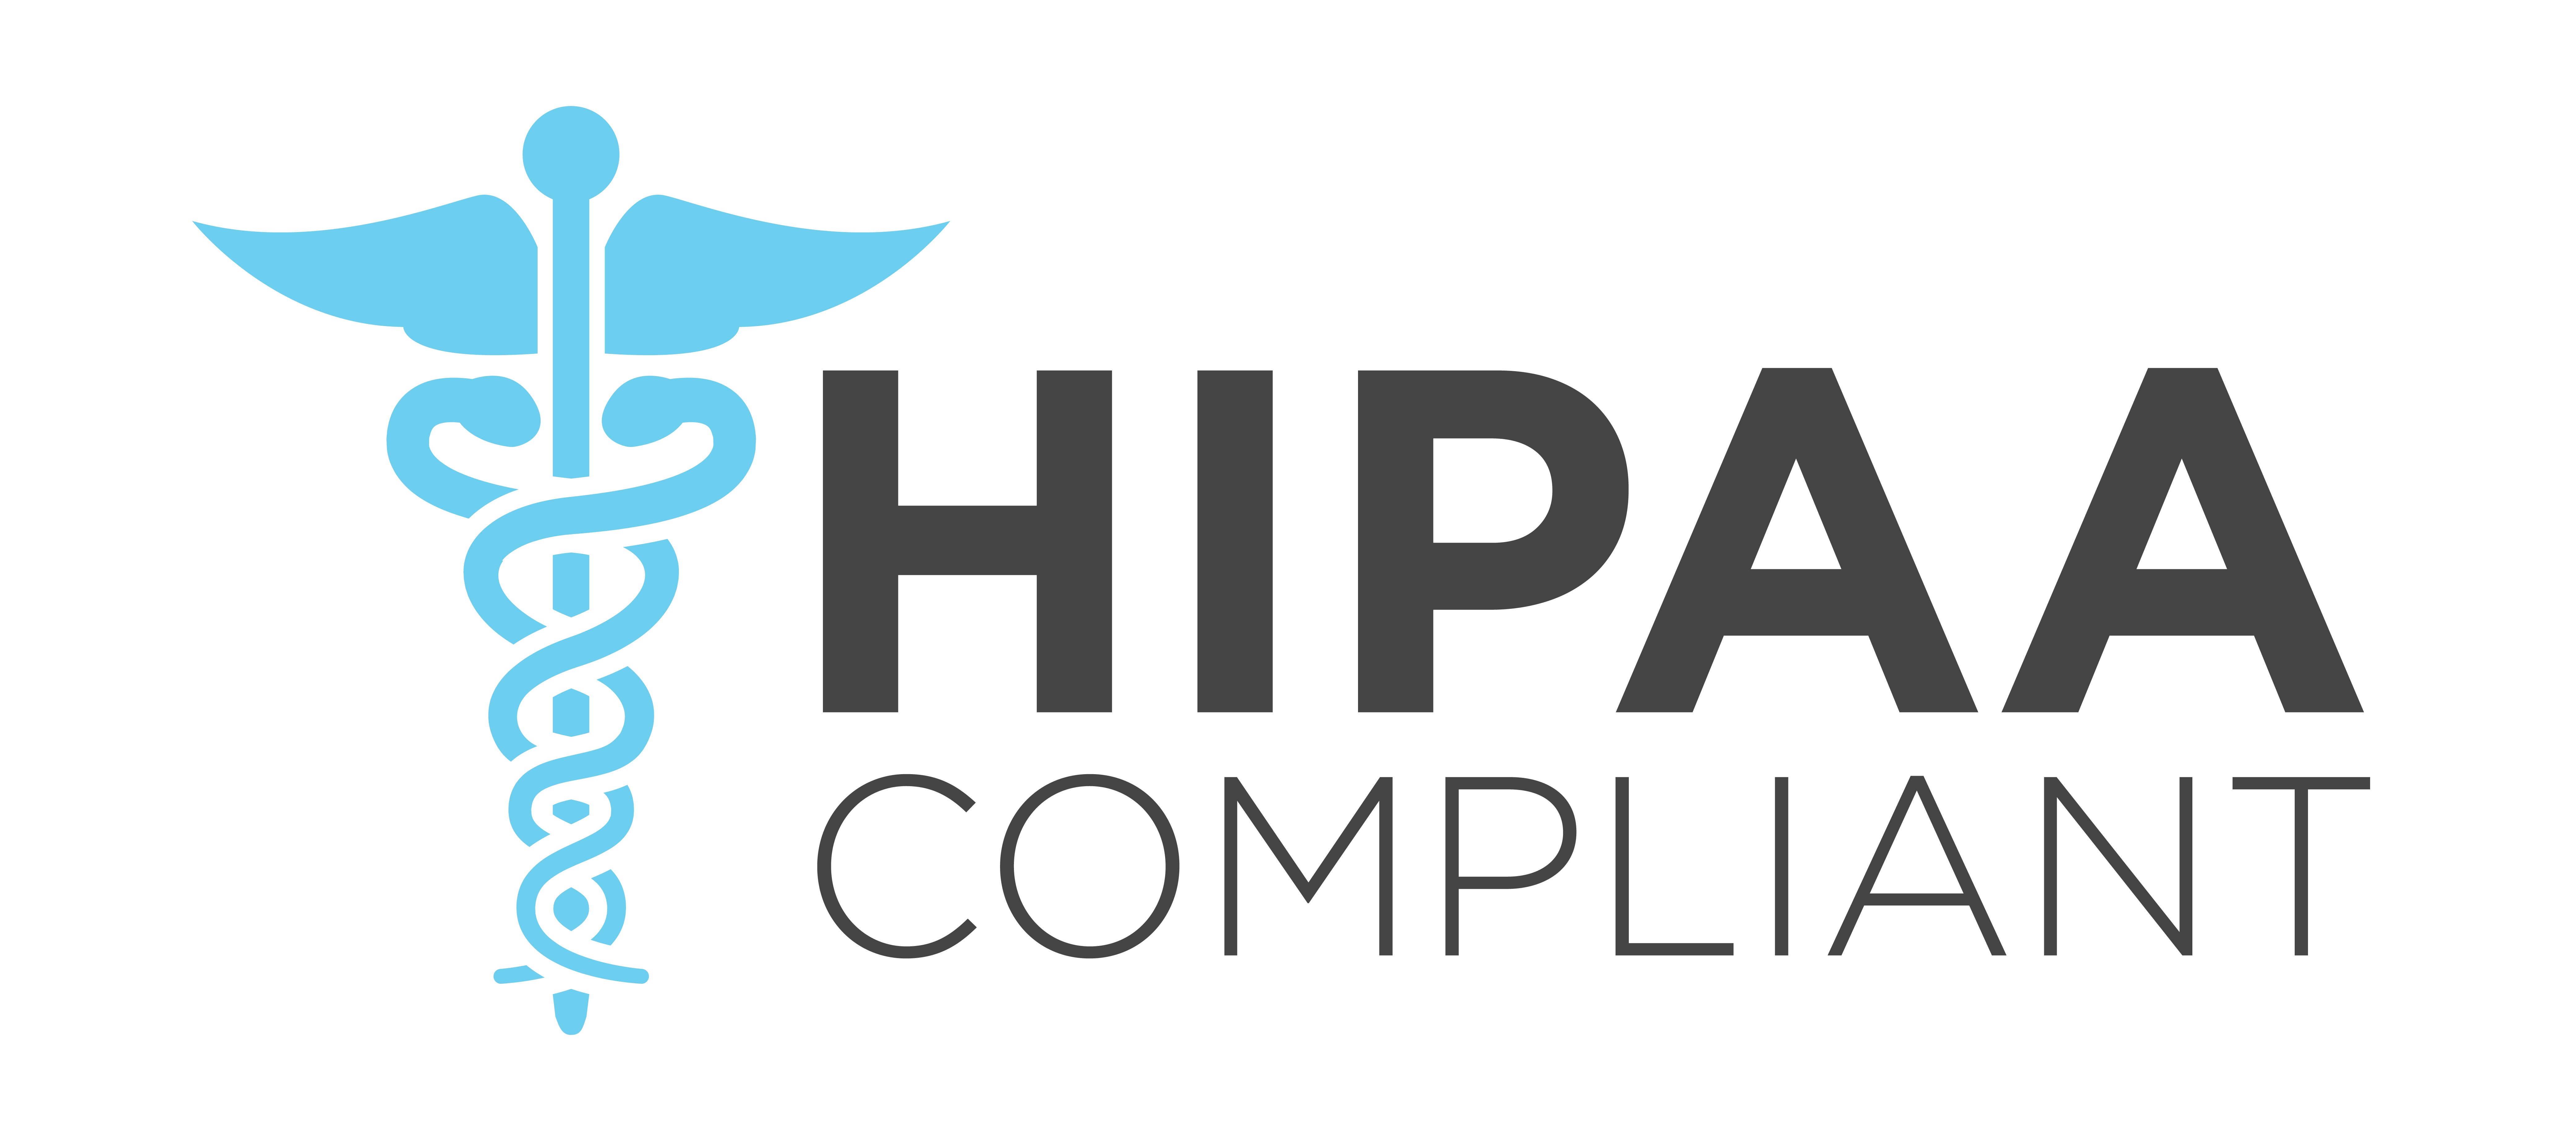 health information security. Faster EHR access while staying HIPAA compliant with automatic PC lock.